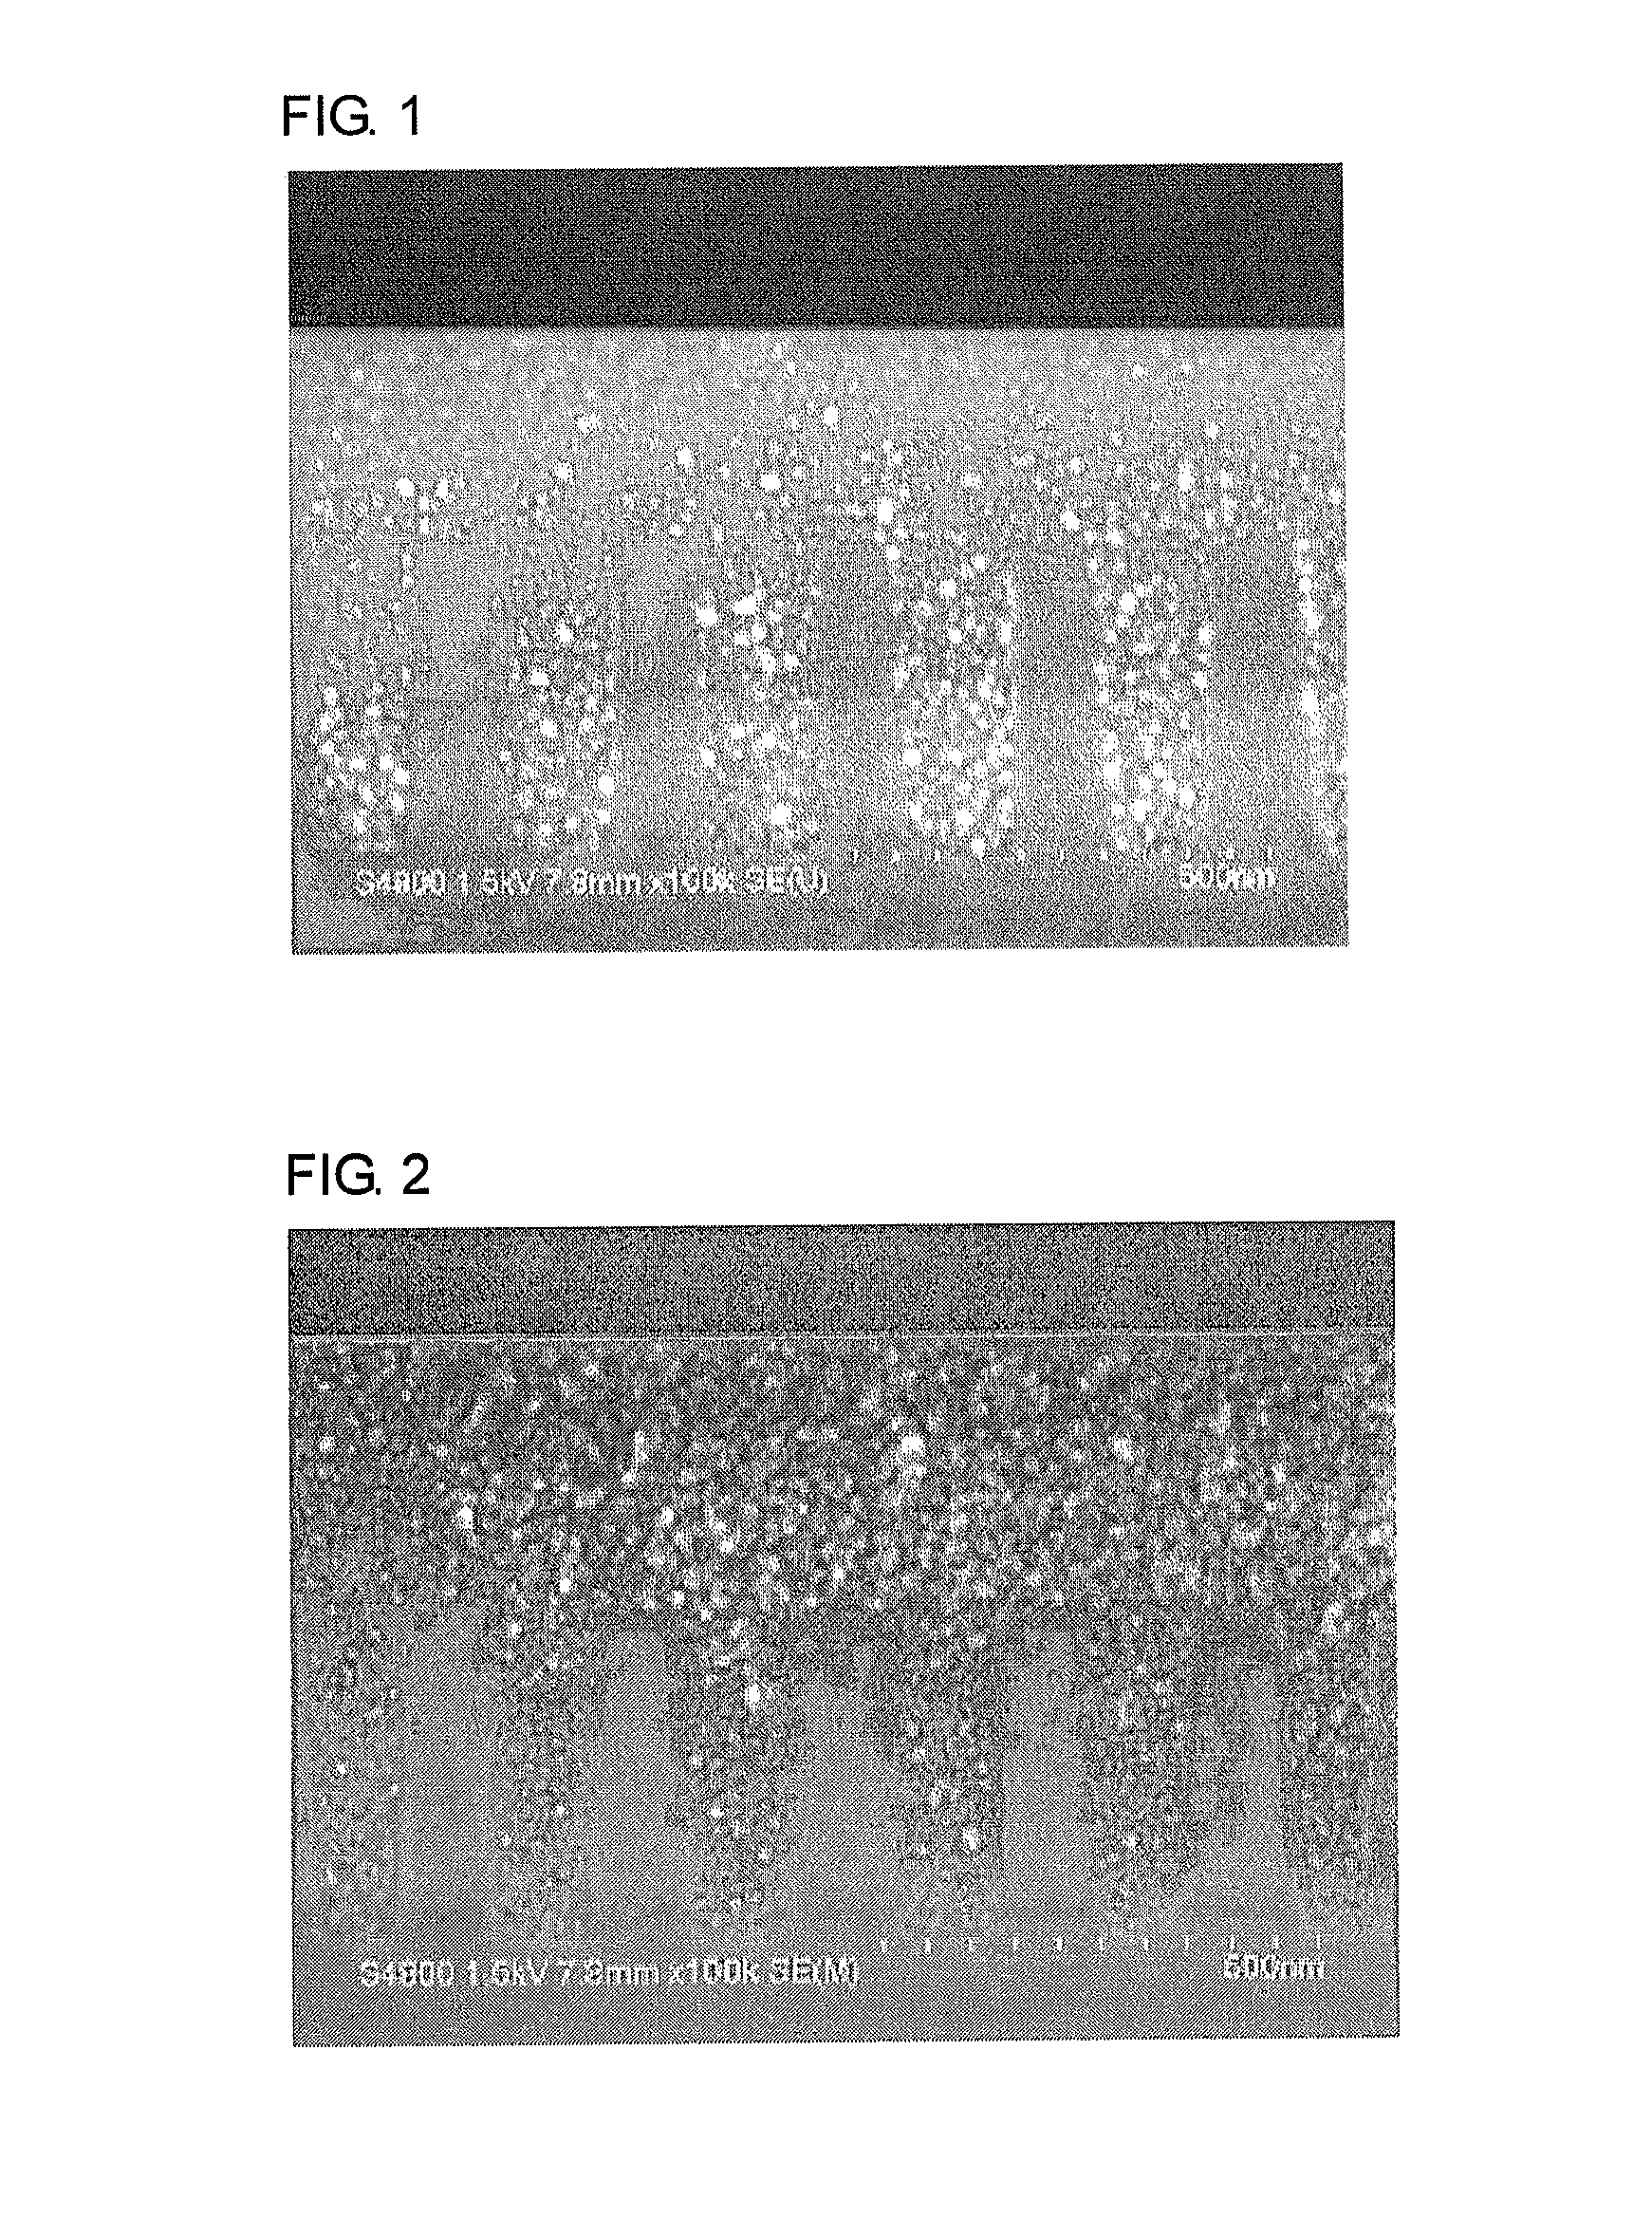 Resist underlayer film forming composition containing phenylindole-containing novolac resin